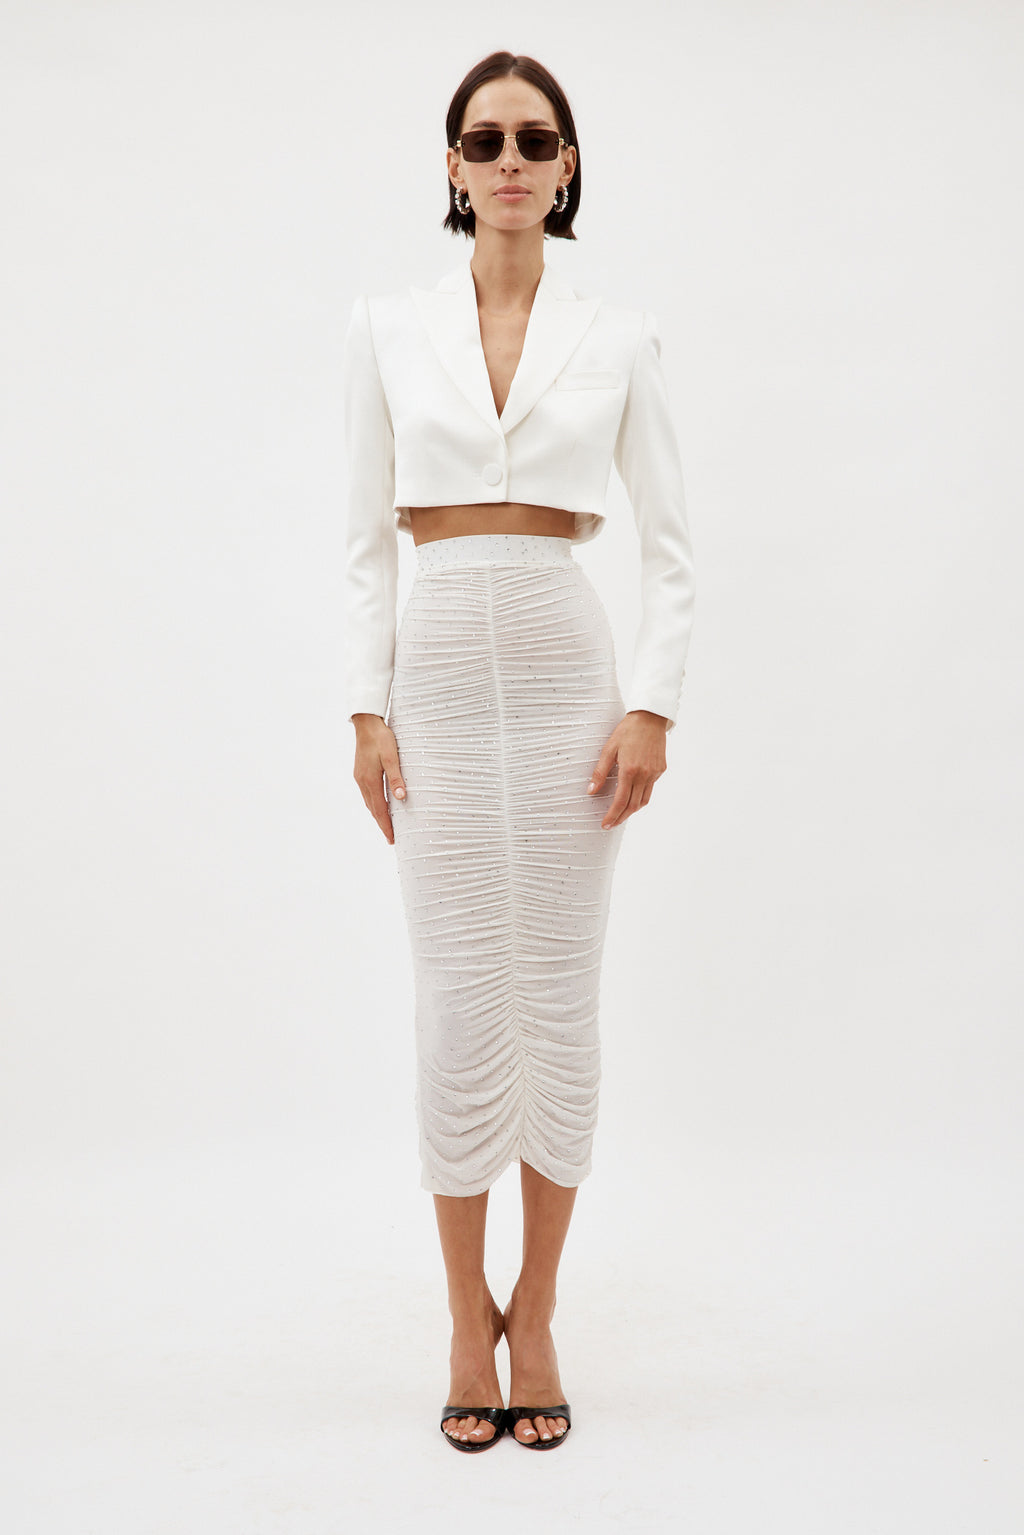 Crystal Jersey Ruched White Skirt